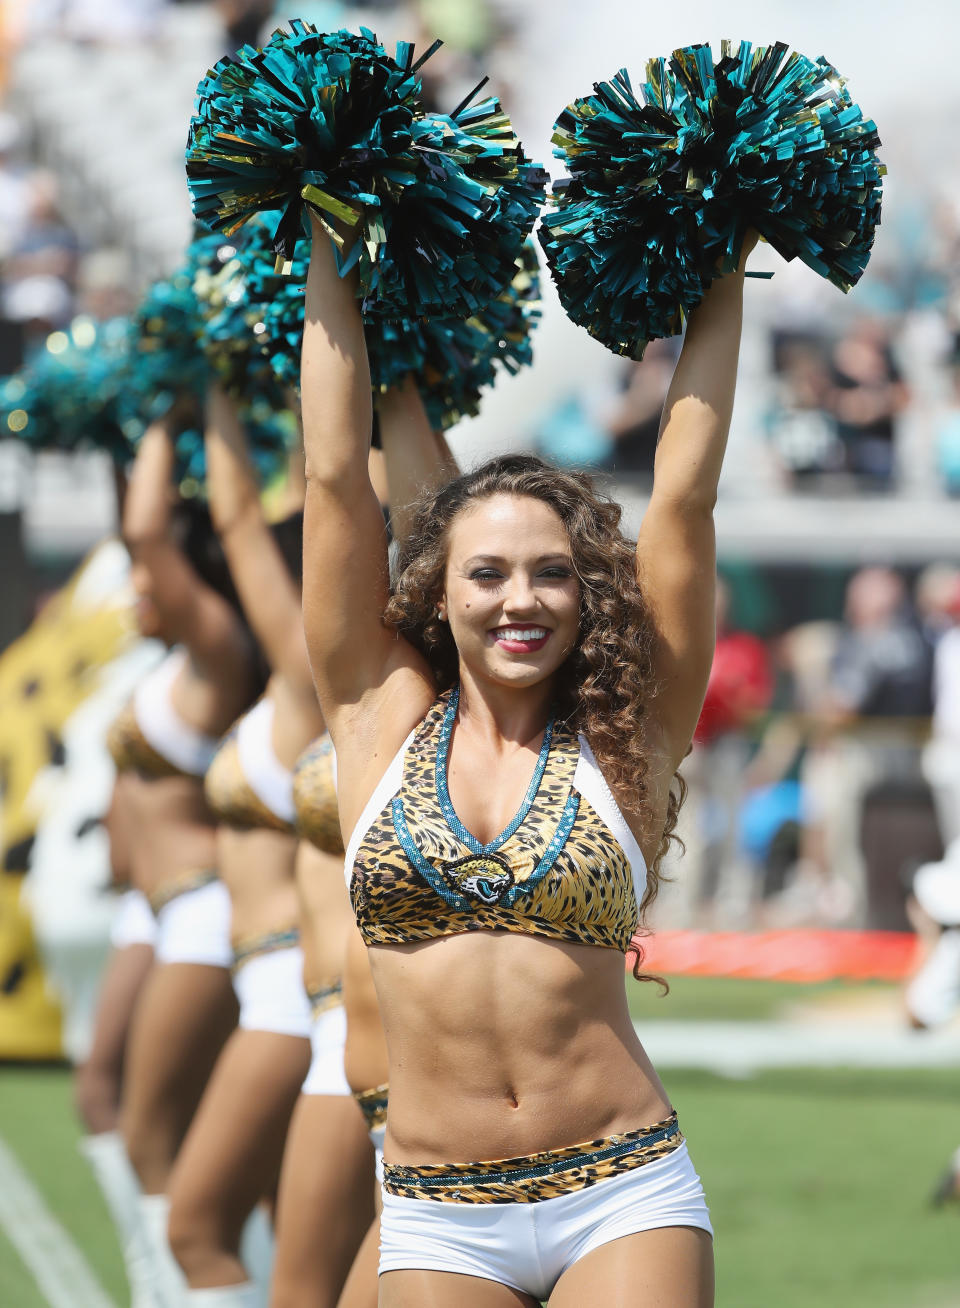 <p>Jacksonville Jaguars cheerleaders perform on the field prior to the start of their game against the Tennessee Titans at EverBank Field on September 17, 2017 in Jacksonville, Florida. (Photo by Sam Greenwood/Getty Images) </p>